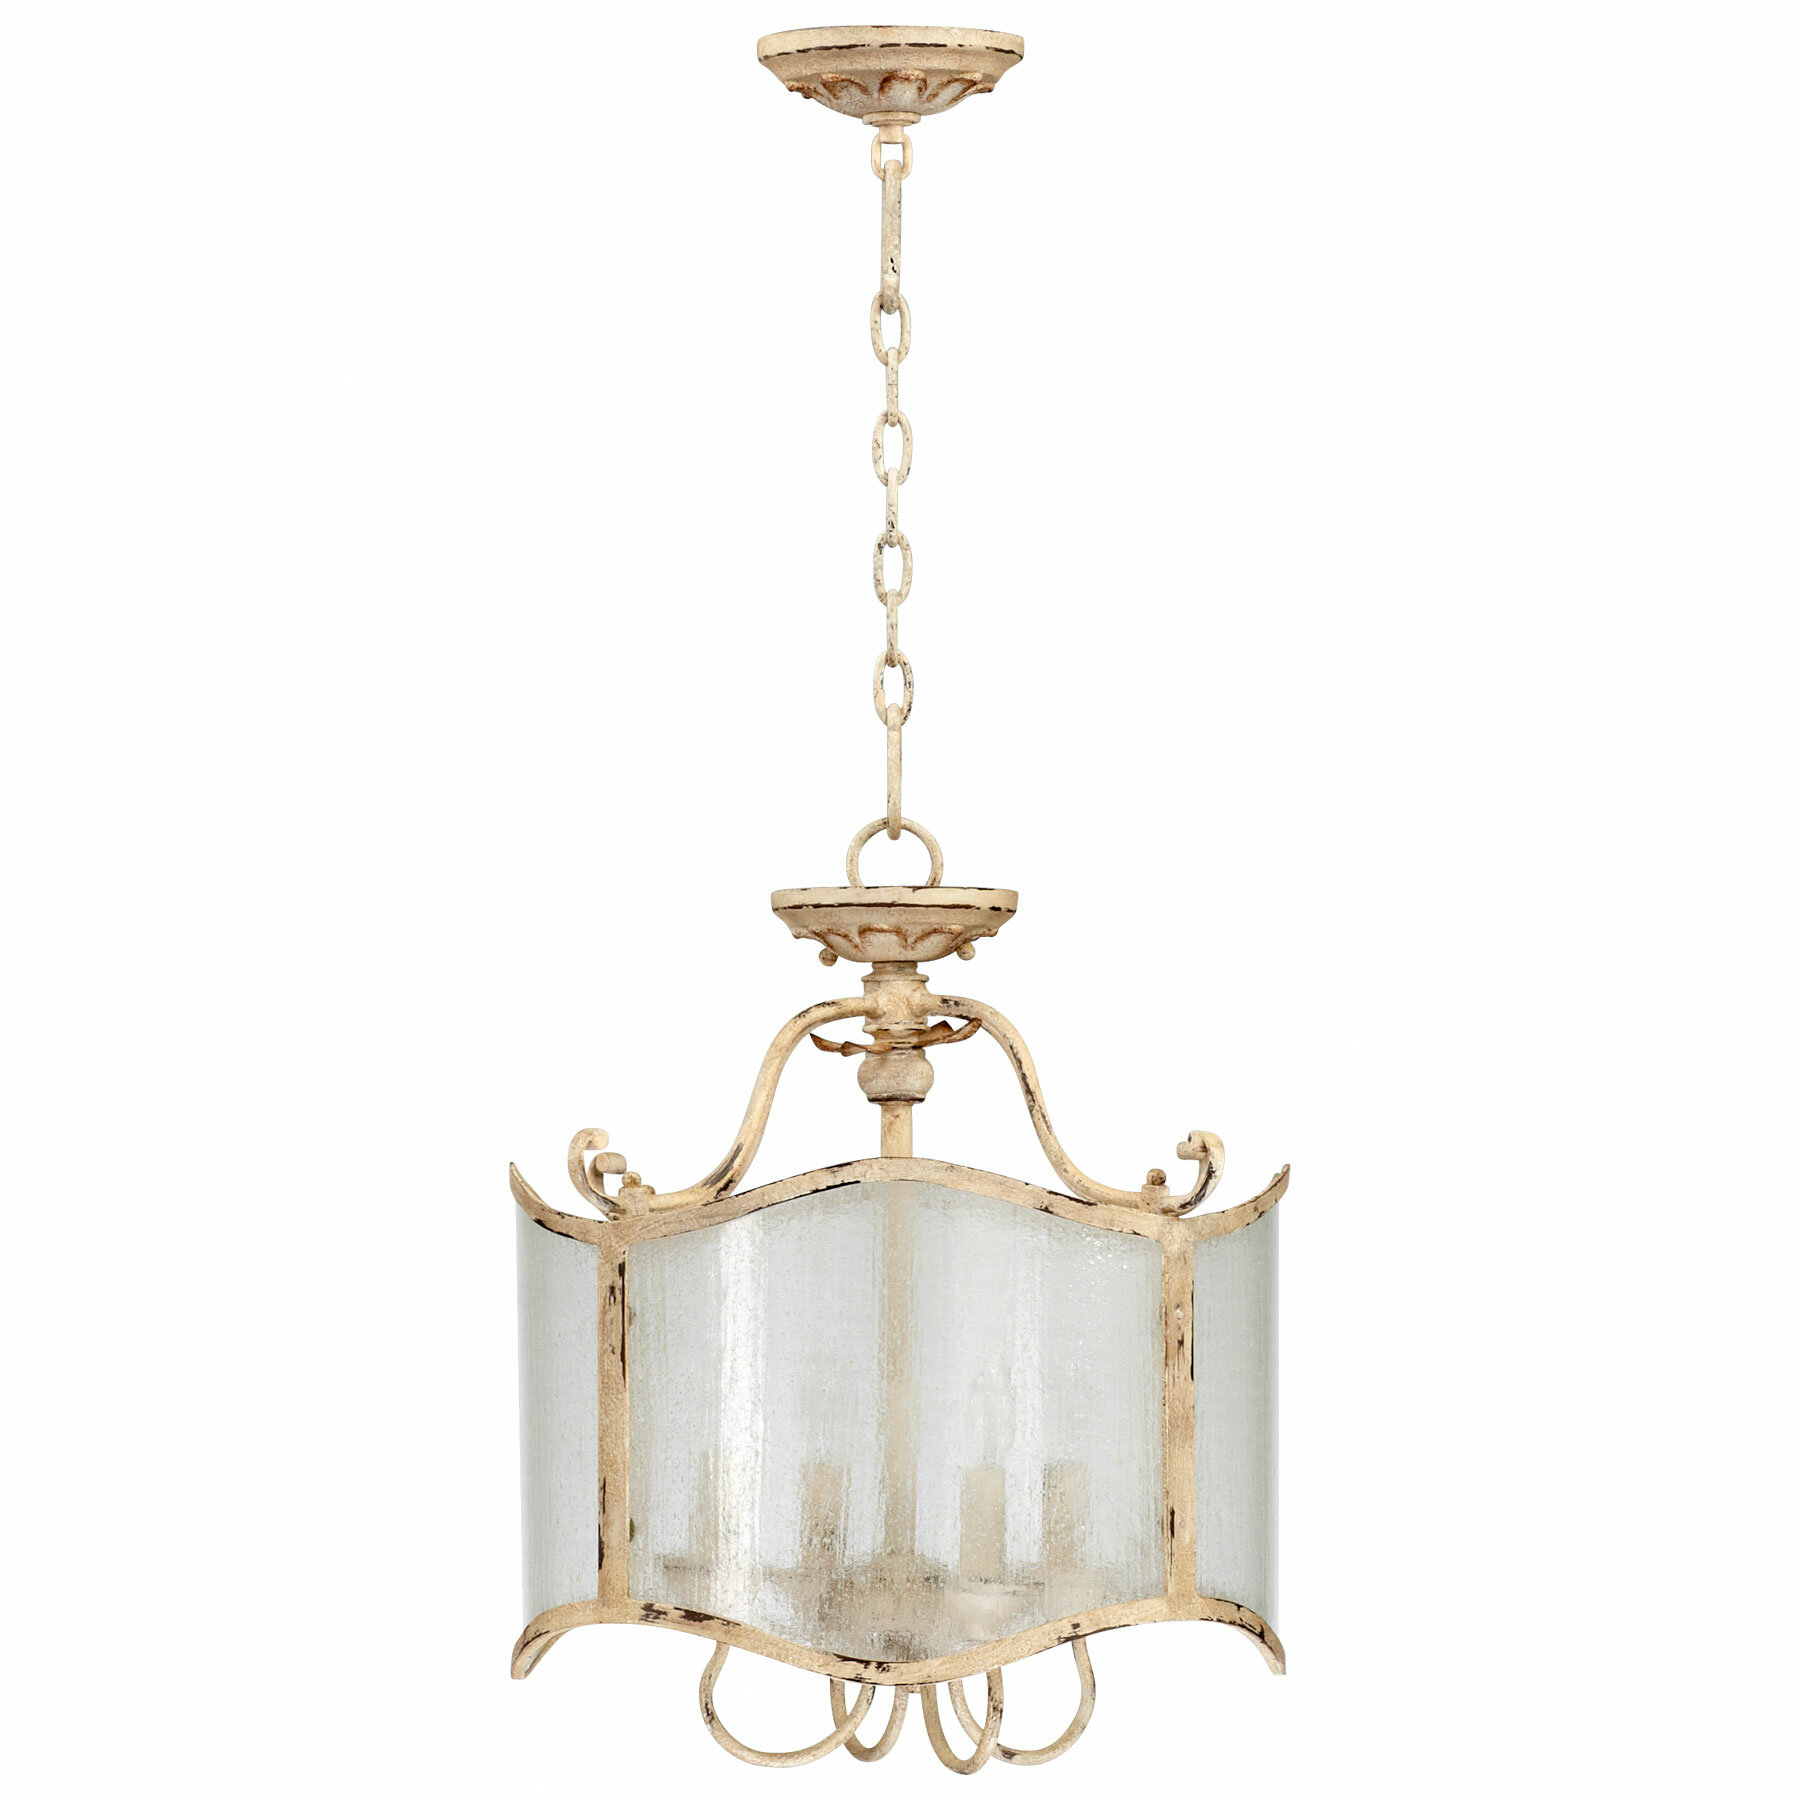 Kathy kuo home maison french country antique white 4 light